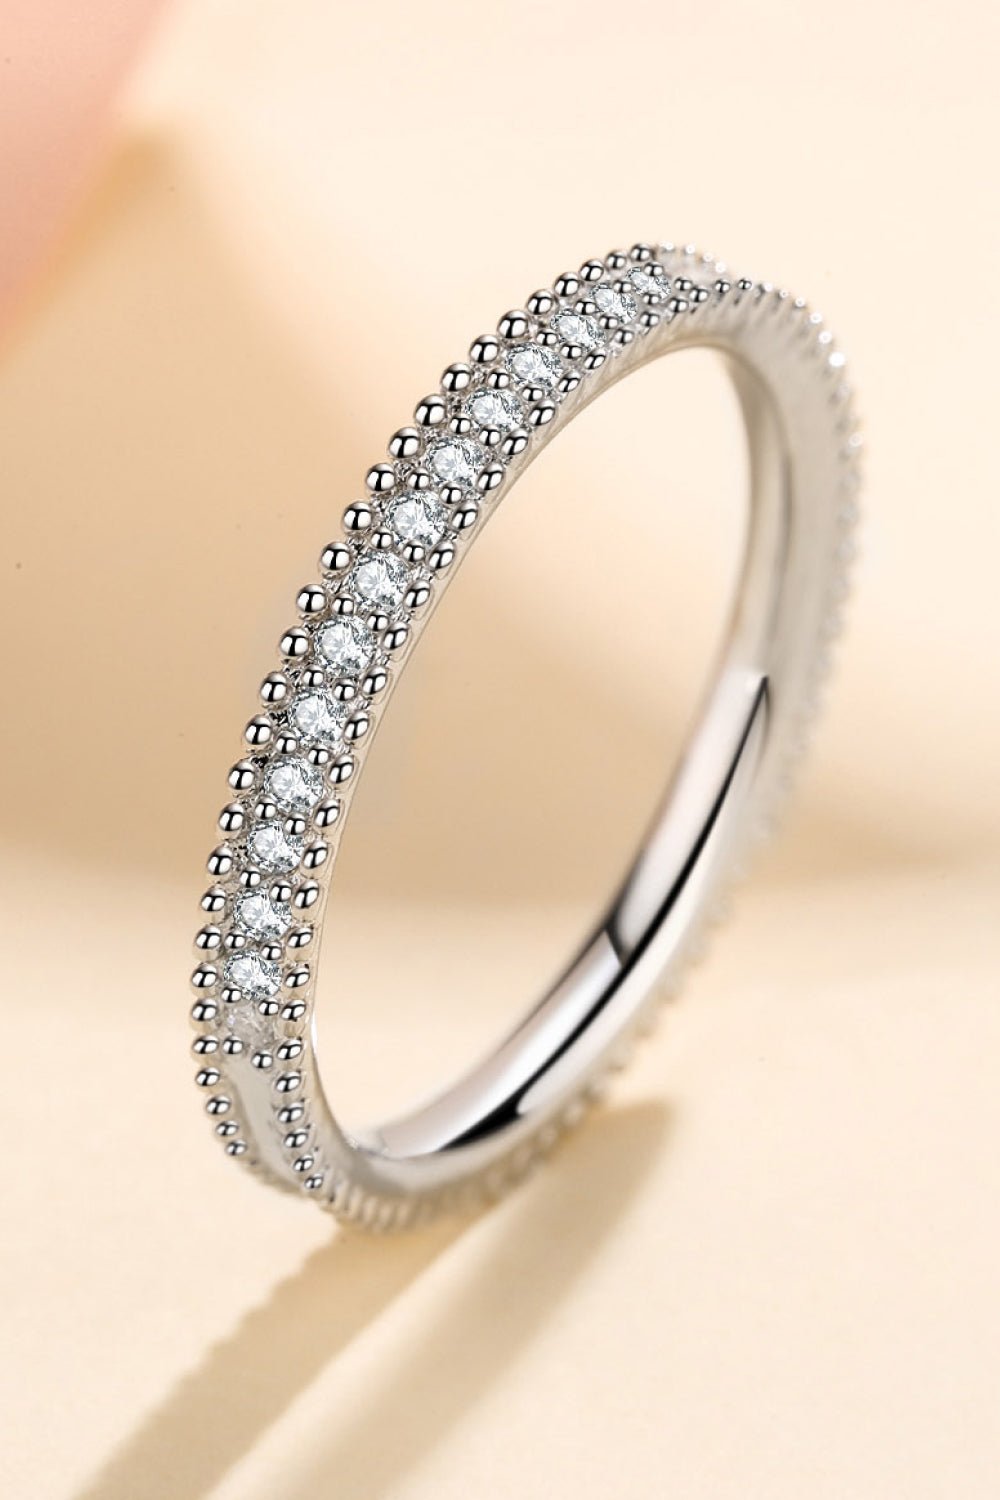 "Eternal Radiance Moissanite Ring - Unveil Your Love with a Timeless Sparkle" - Guy Christopher